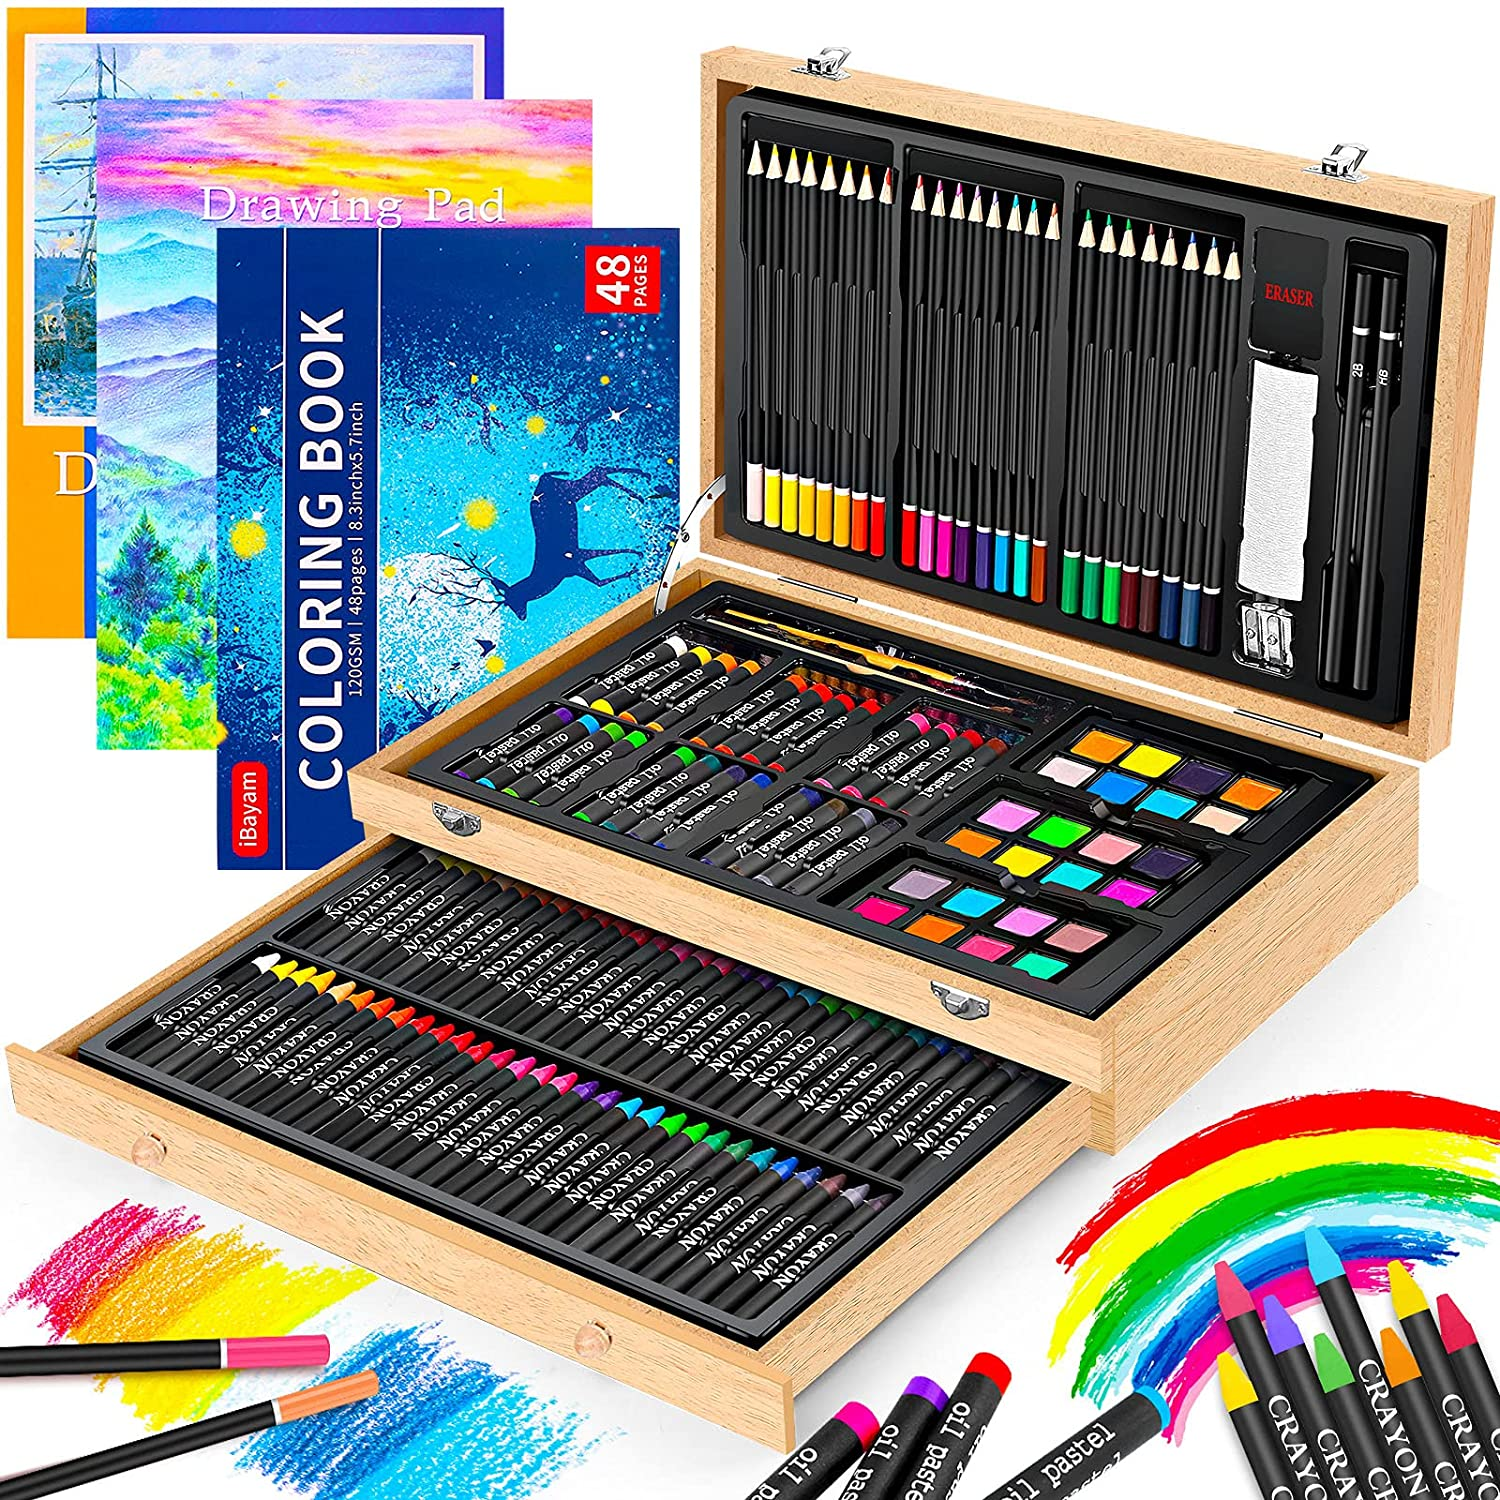 Art Supplies, Ibayam 150-Pack Deluxe Wooden Art Set Crafts Drawing Painting Kit with 1 Coloring Book, 2 Sketch Pads, Creative Gift Box for Adults Artist Beginners